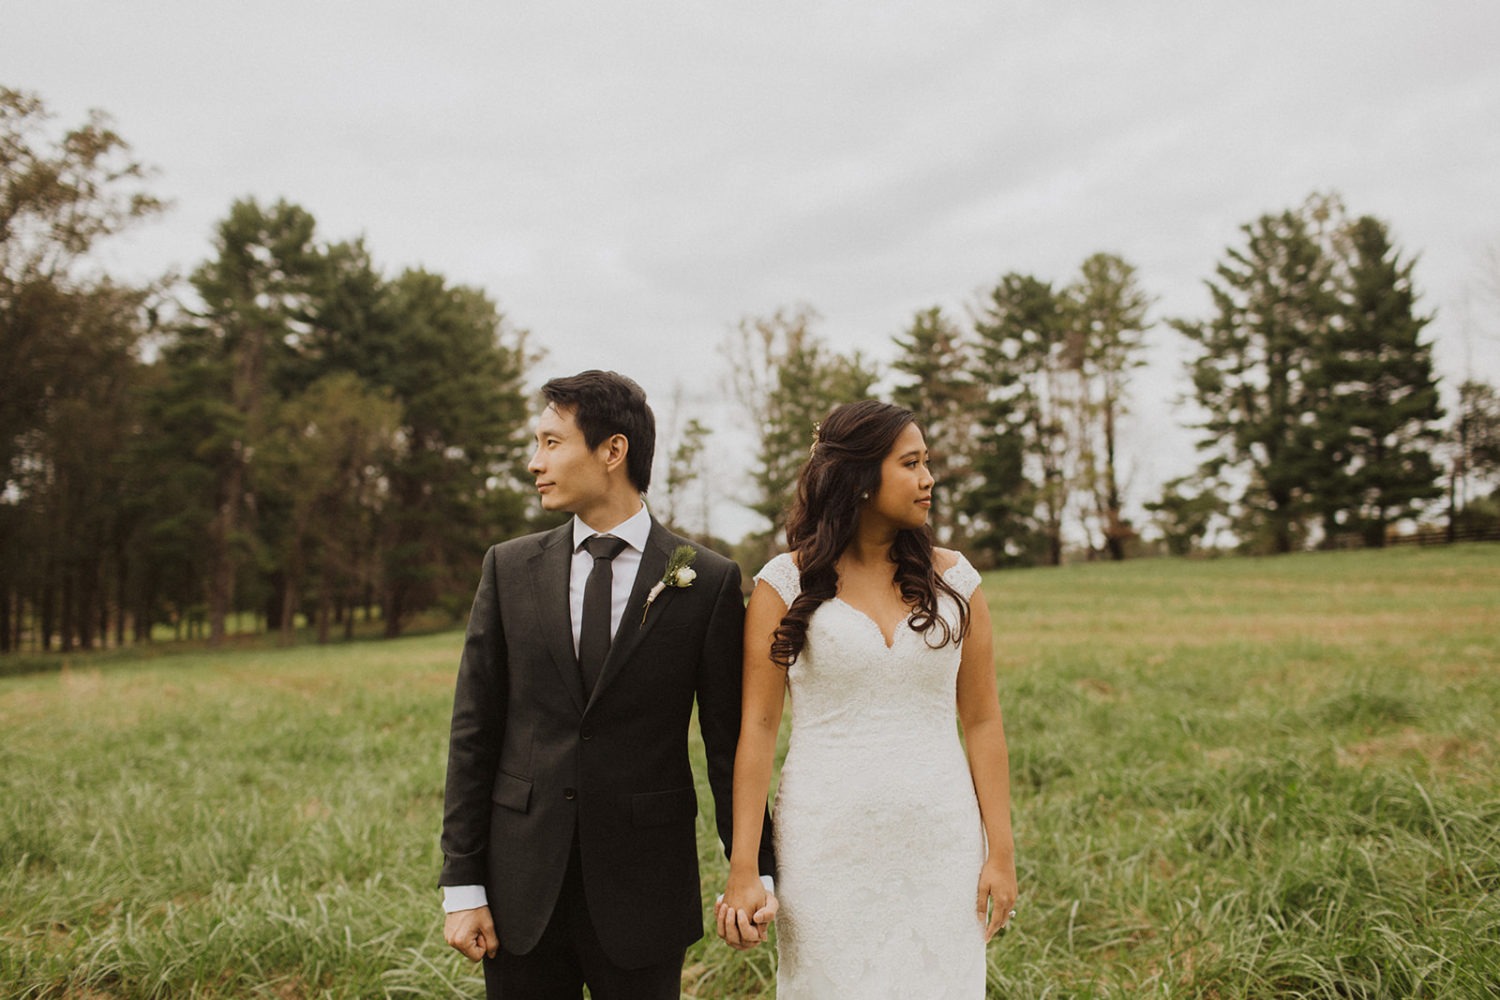 Couple stands holding hands in field at Virginia outdoor wedding venue.